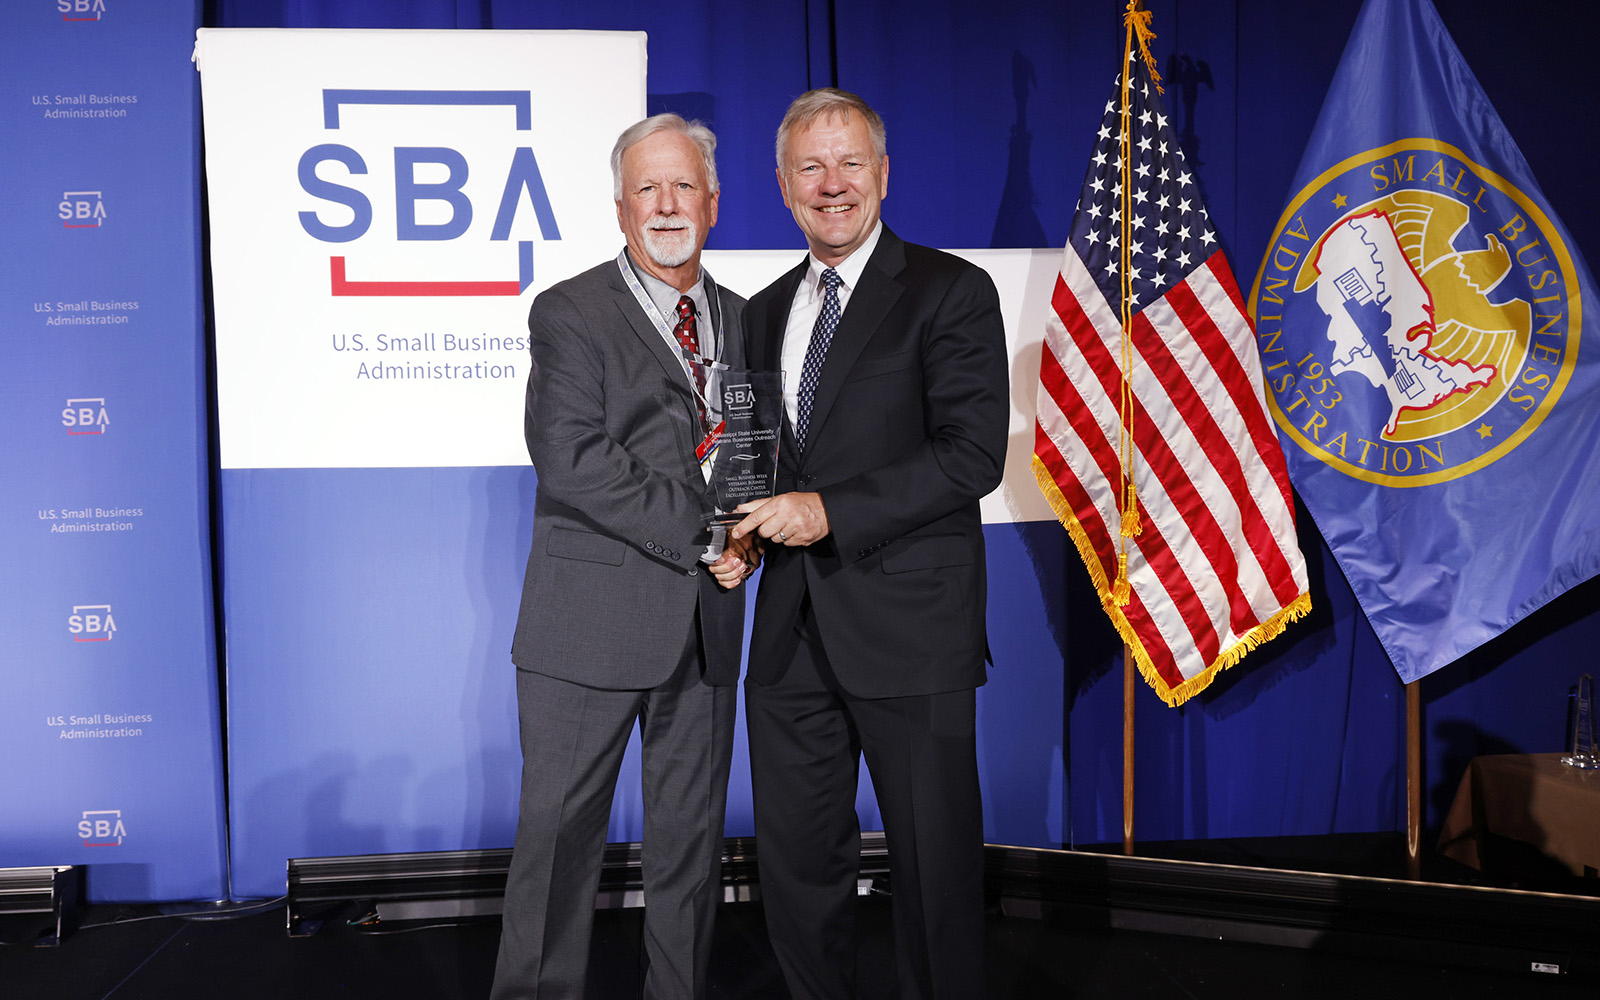 Veterans Business Outreach Center at MSU awarded VBOC of the Year honor